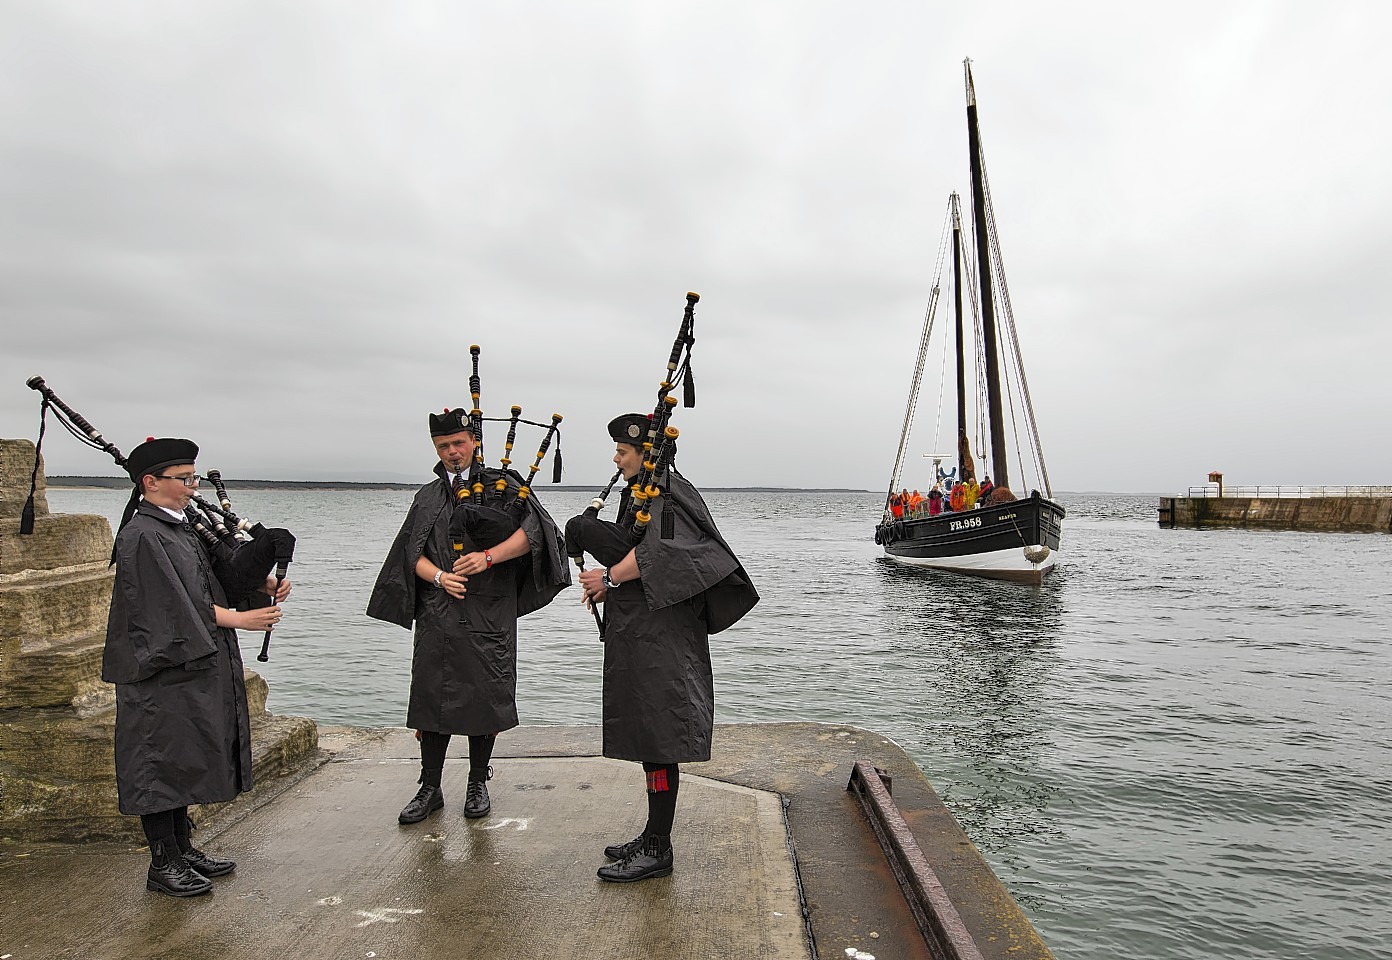 The reaper arrives at Burghead